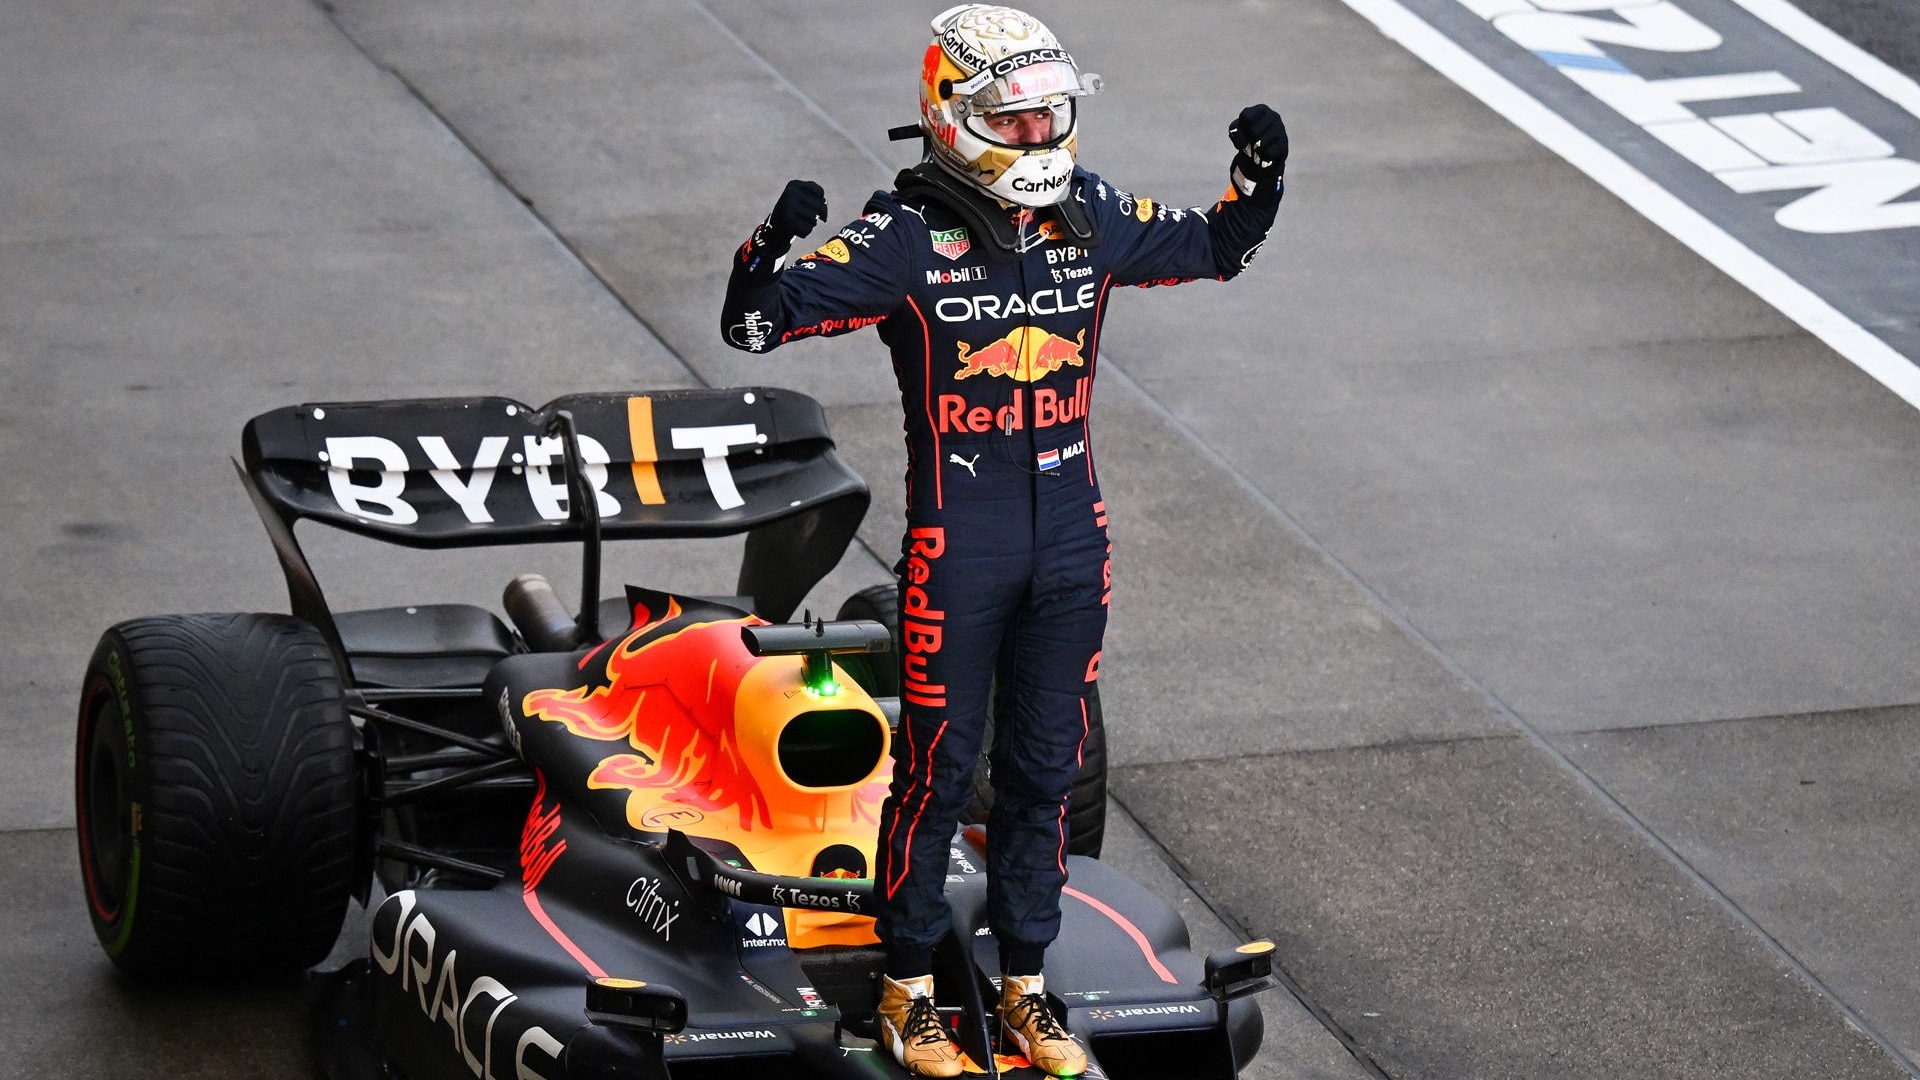 Max Verstappen at the 2022 Formula 1 Japanese Grand Prix - Photo credit: Getty Images